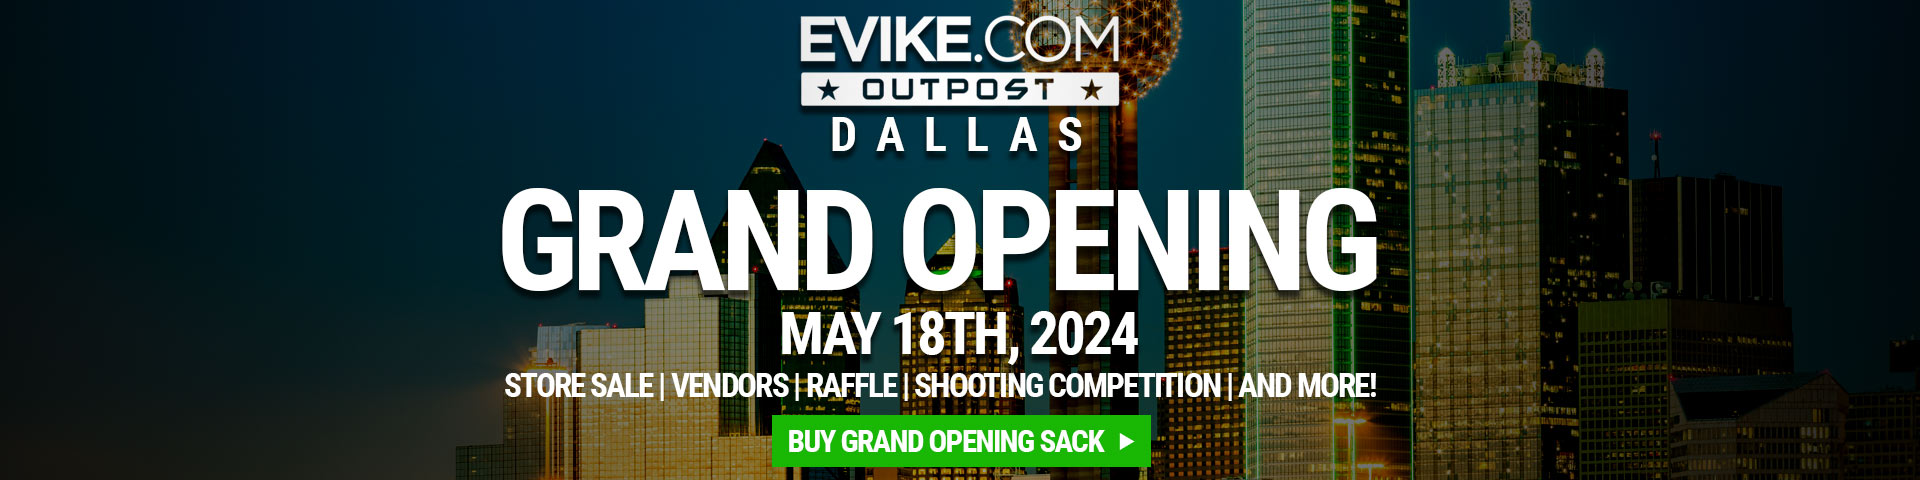 Evike Outpost Dallas Grand Opening